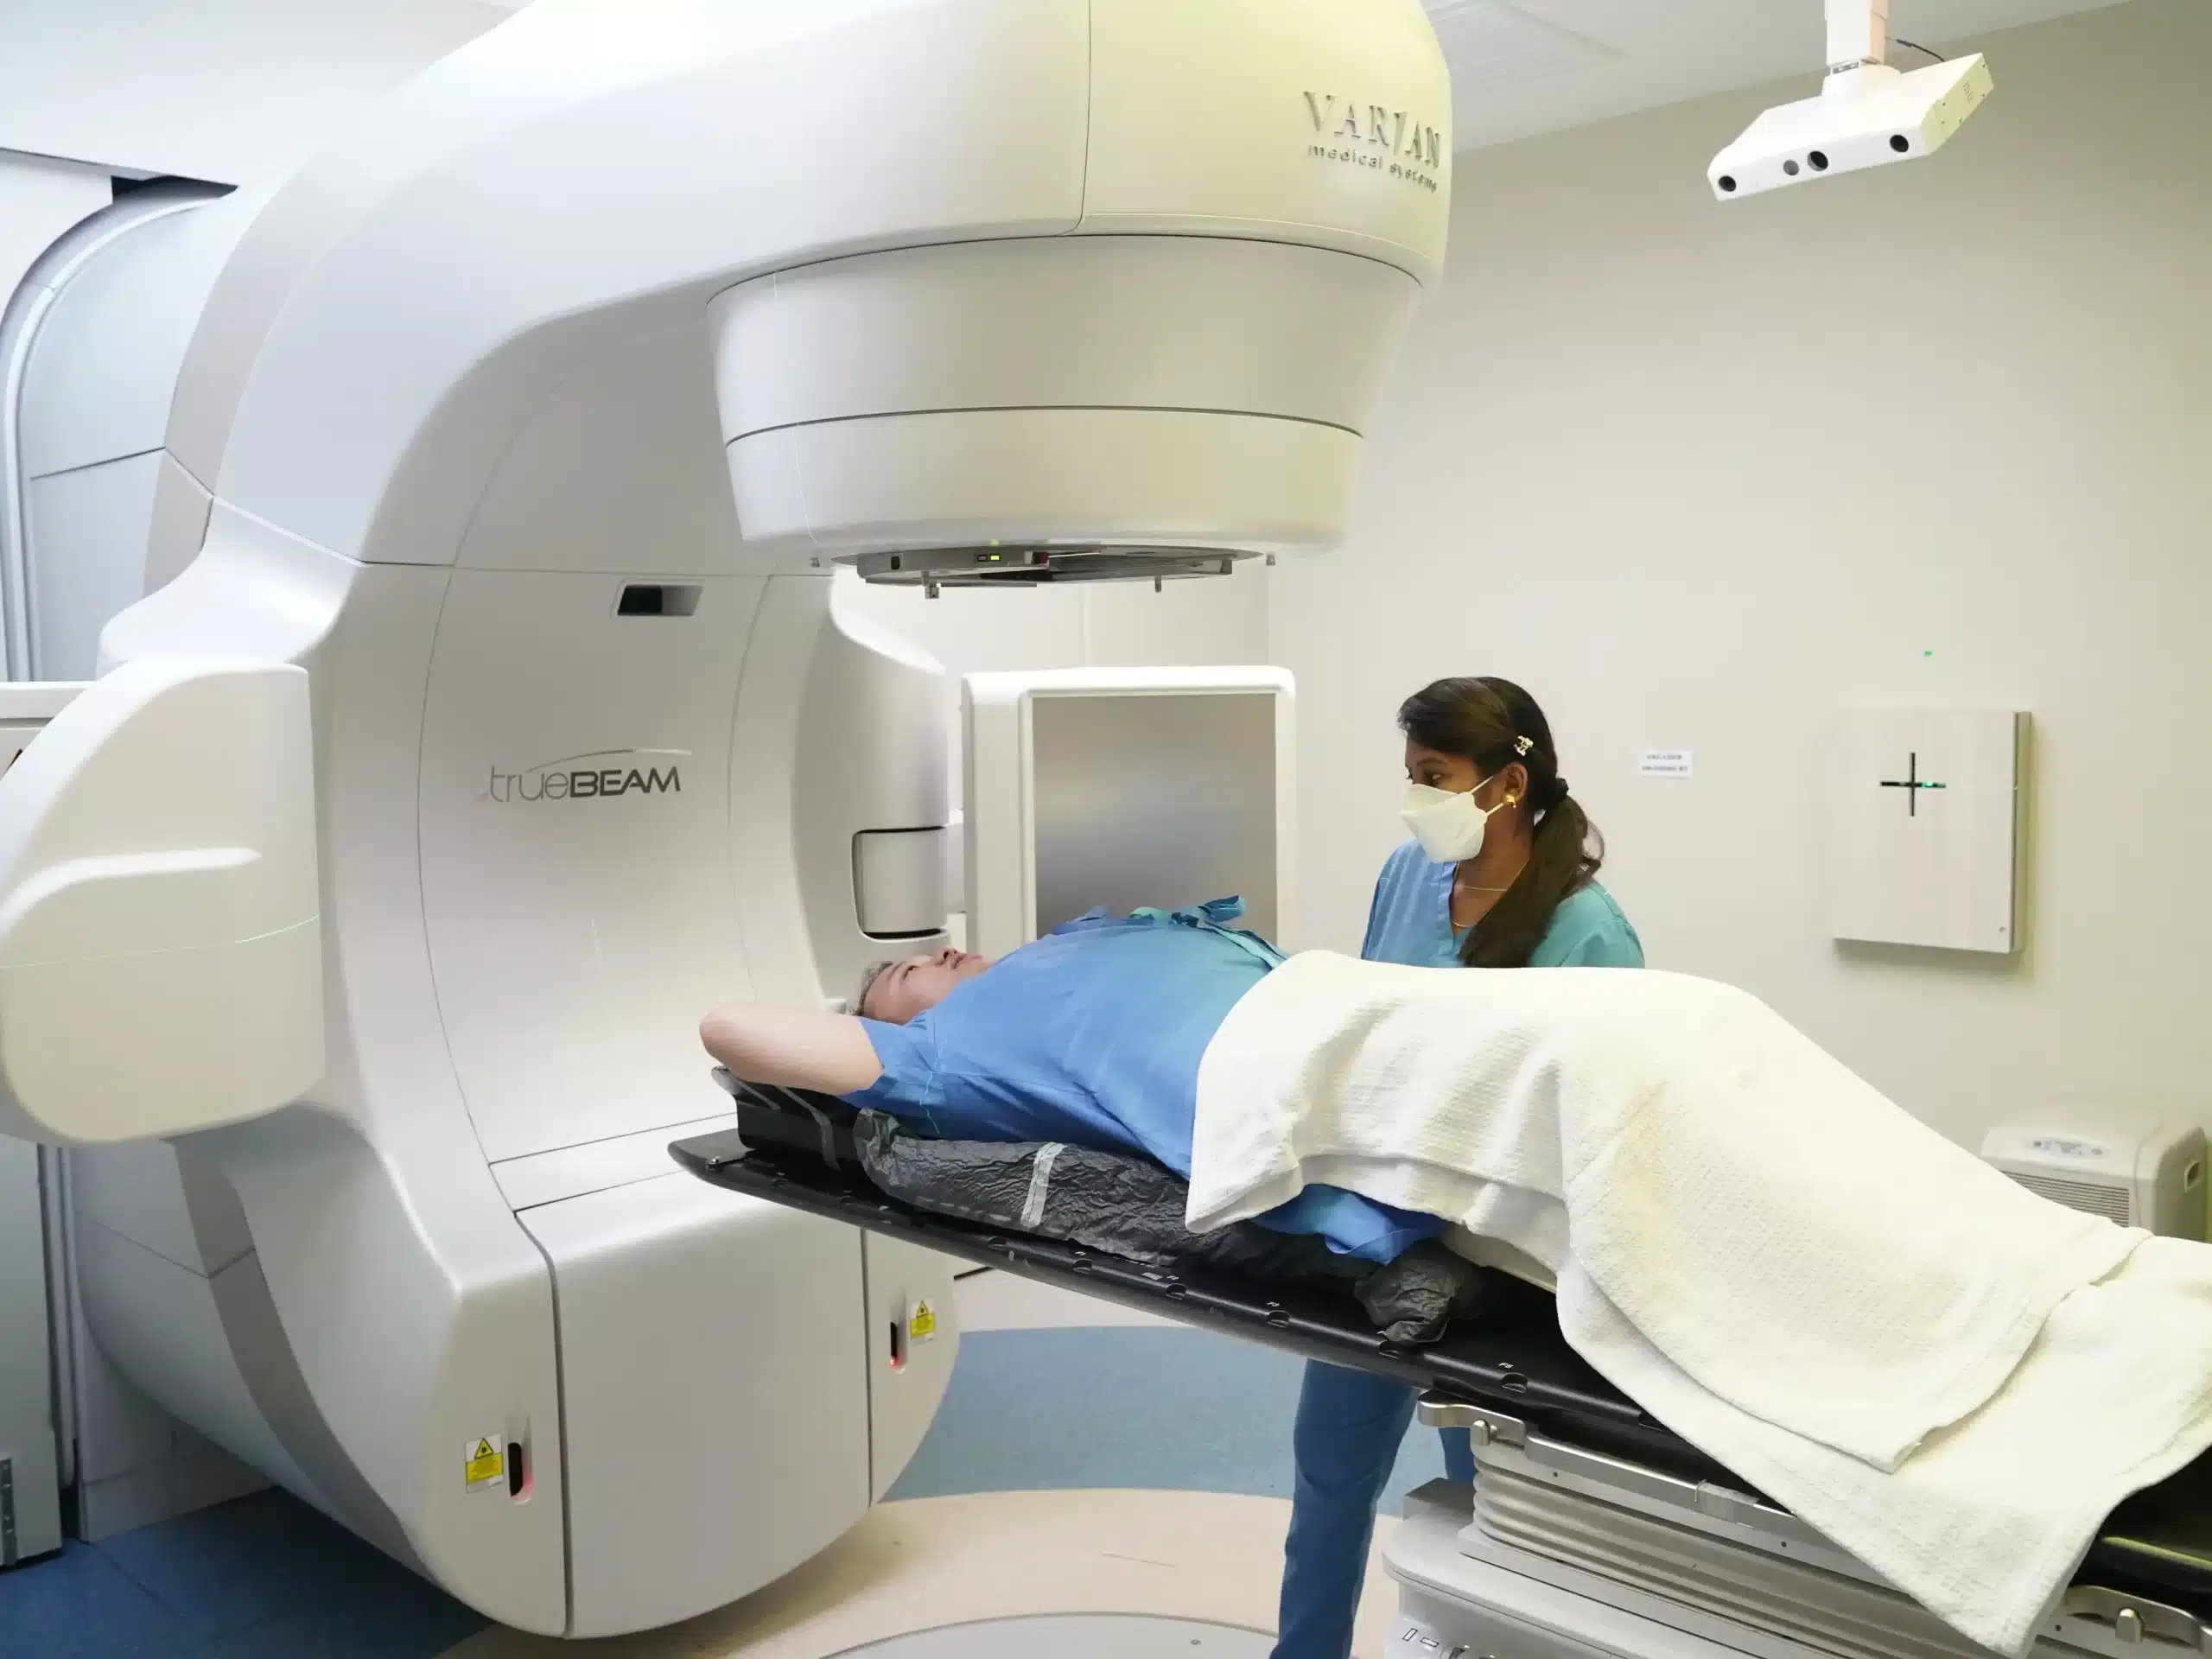 Radiotherapy Treatment, during treatment, scanning, imaging